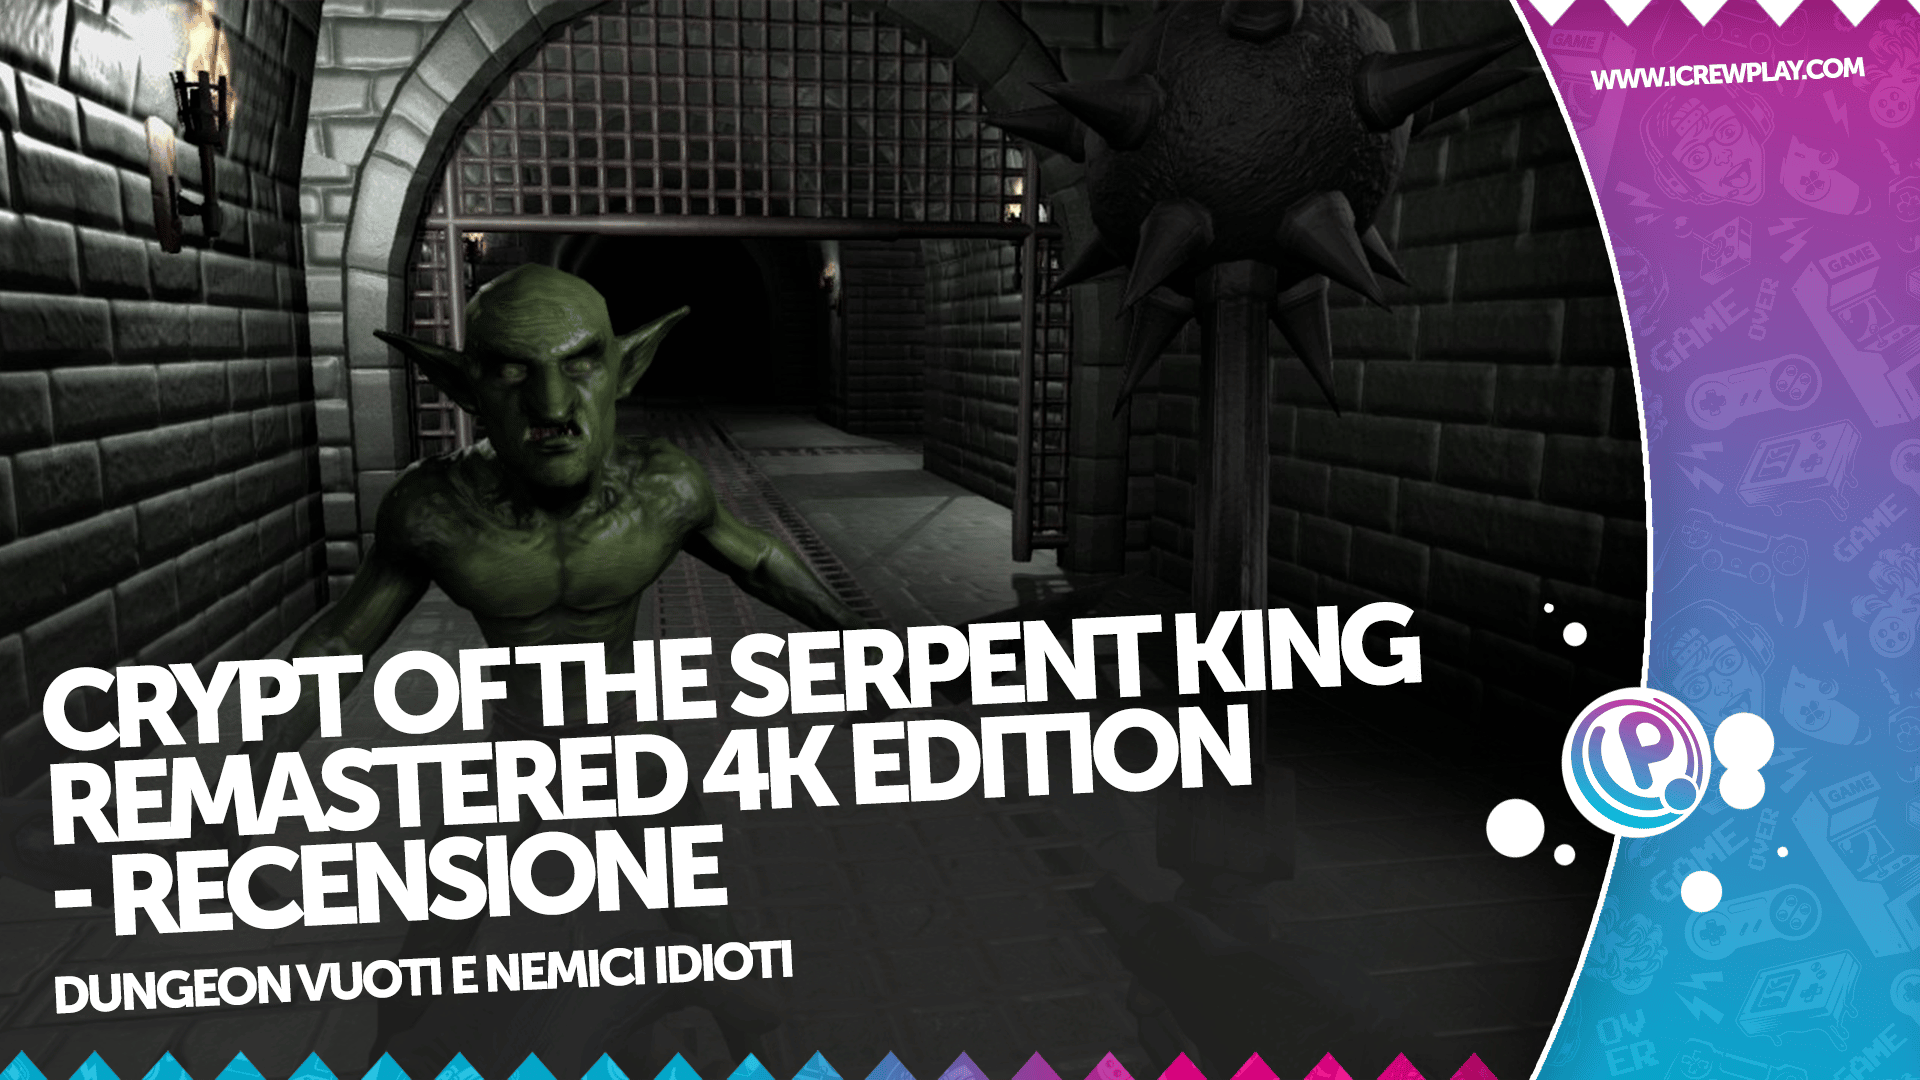 Crypt of the Serpent King Remastered 4K Edition - Recensione per PlayStation 5 2